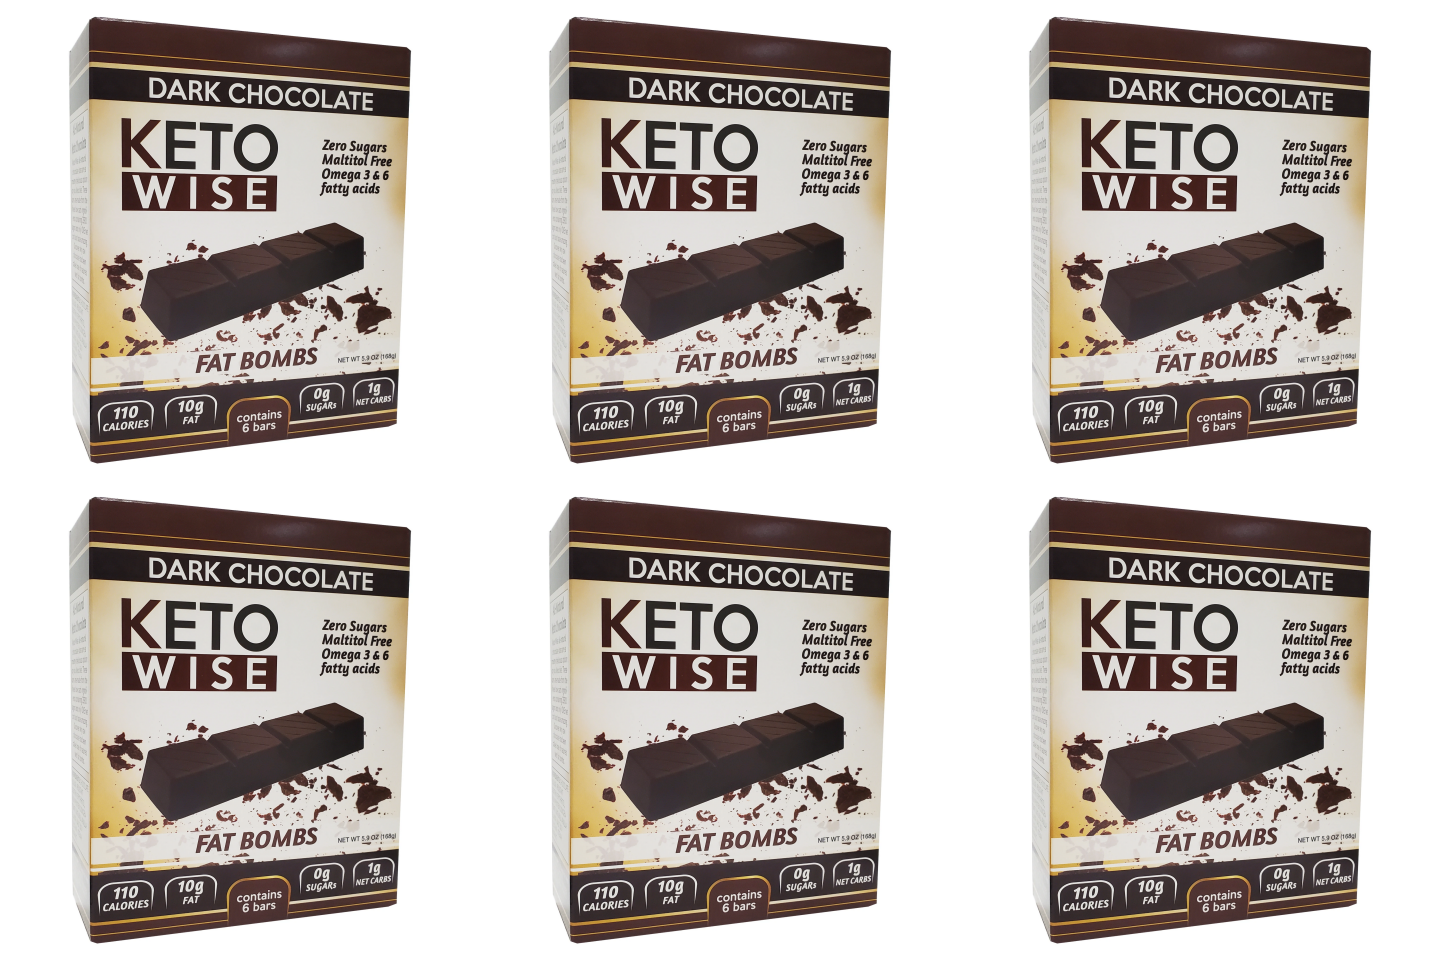 Keto Wise Fat Bombs - Dark Chocolate Bar - High-quality Candies by Keto Wise at 